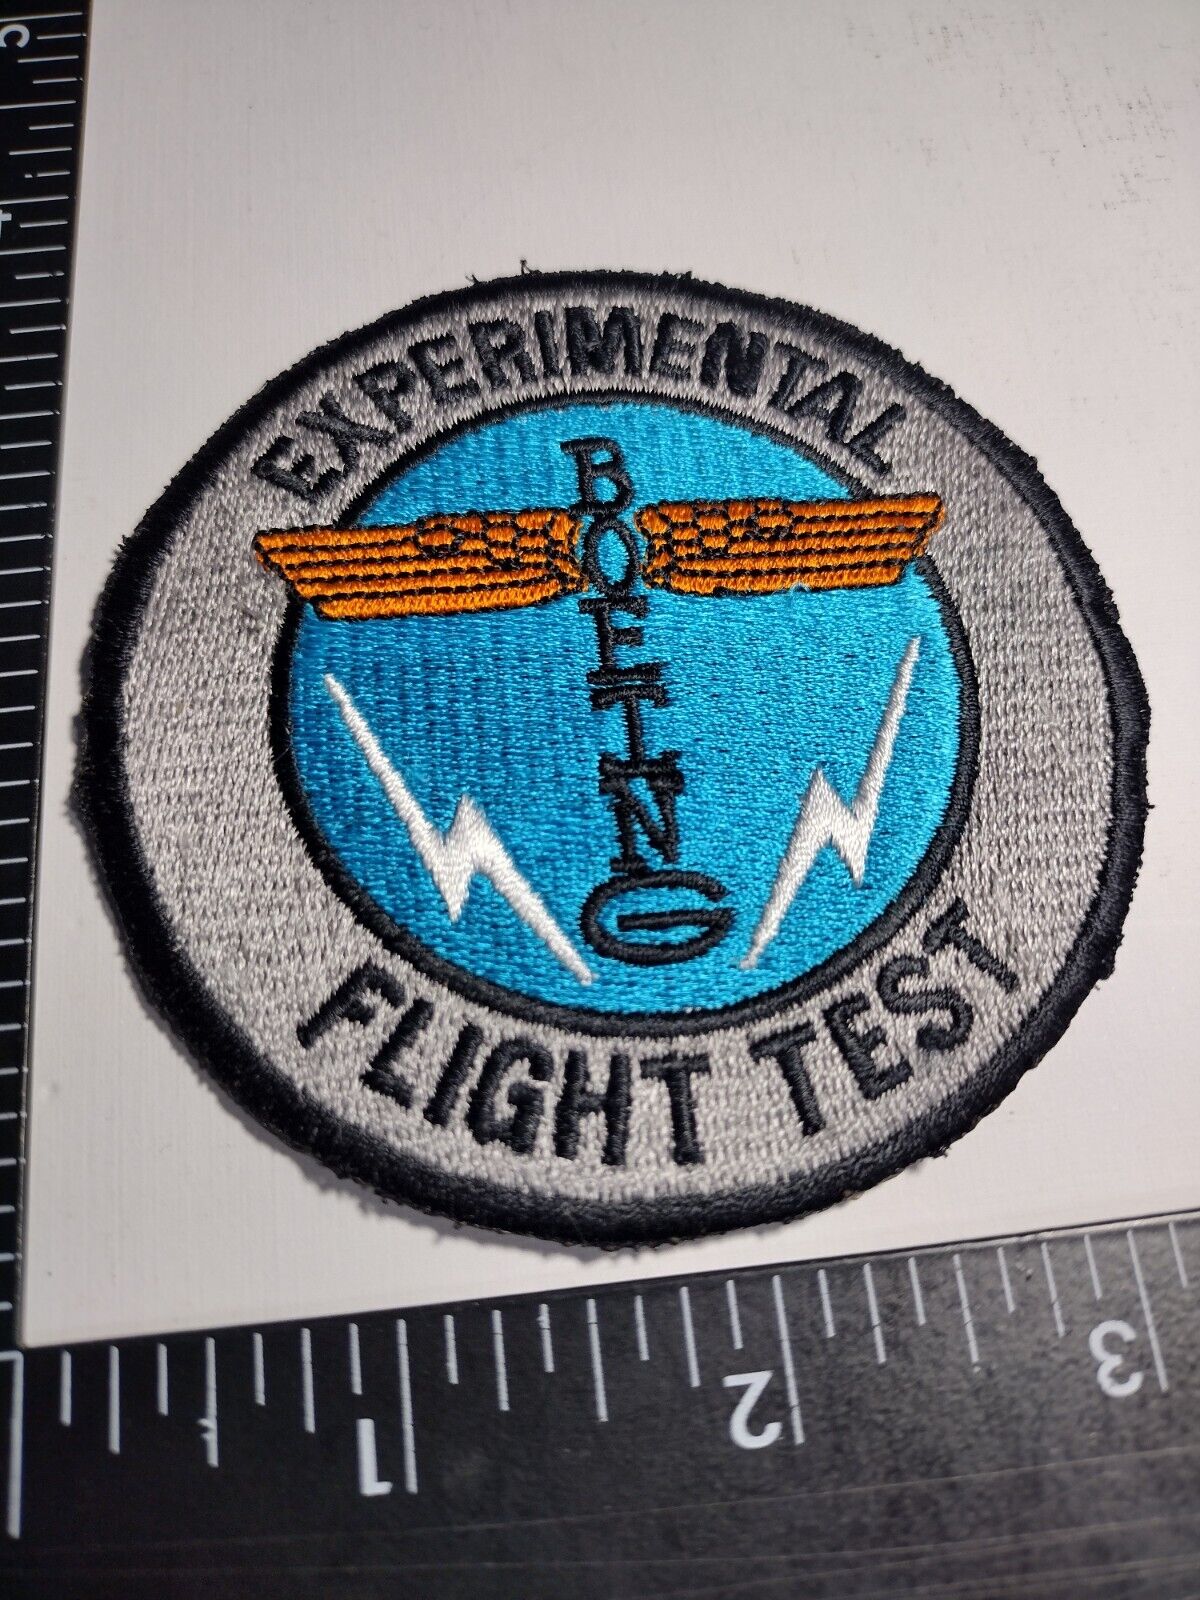 Boeing High Quality Patch Experimental Flight Test sew/Iron Fast Shipping W/TRK#